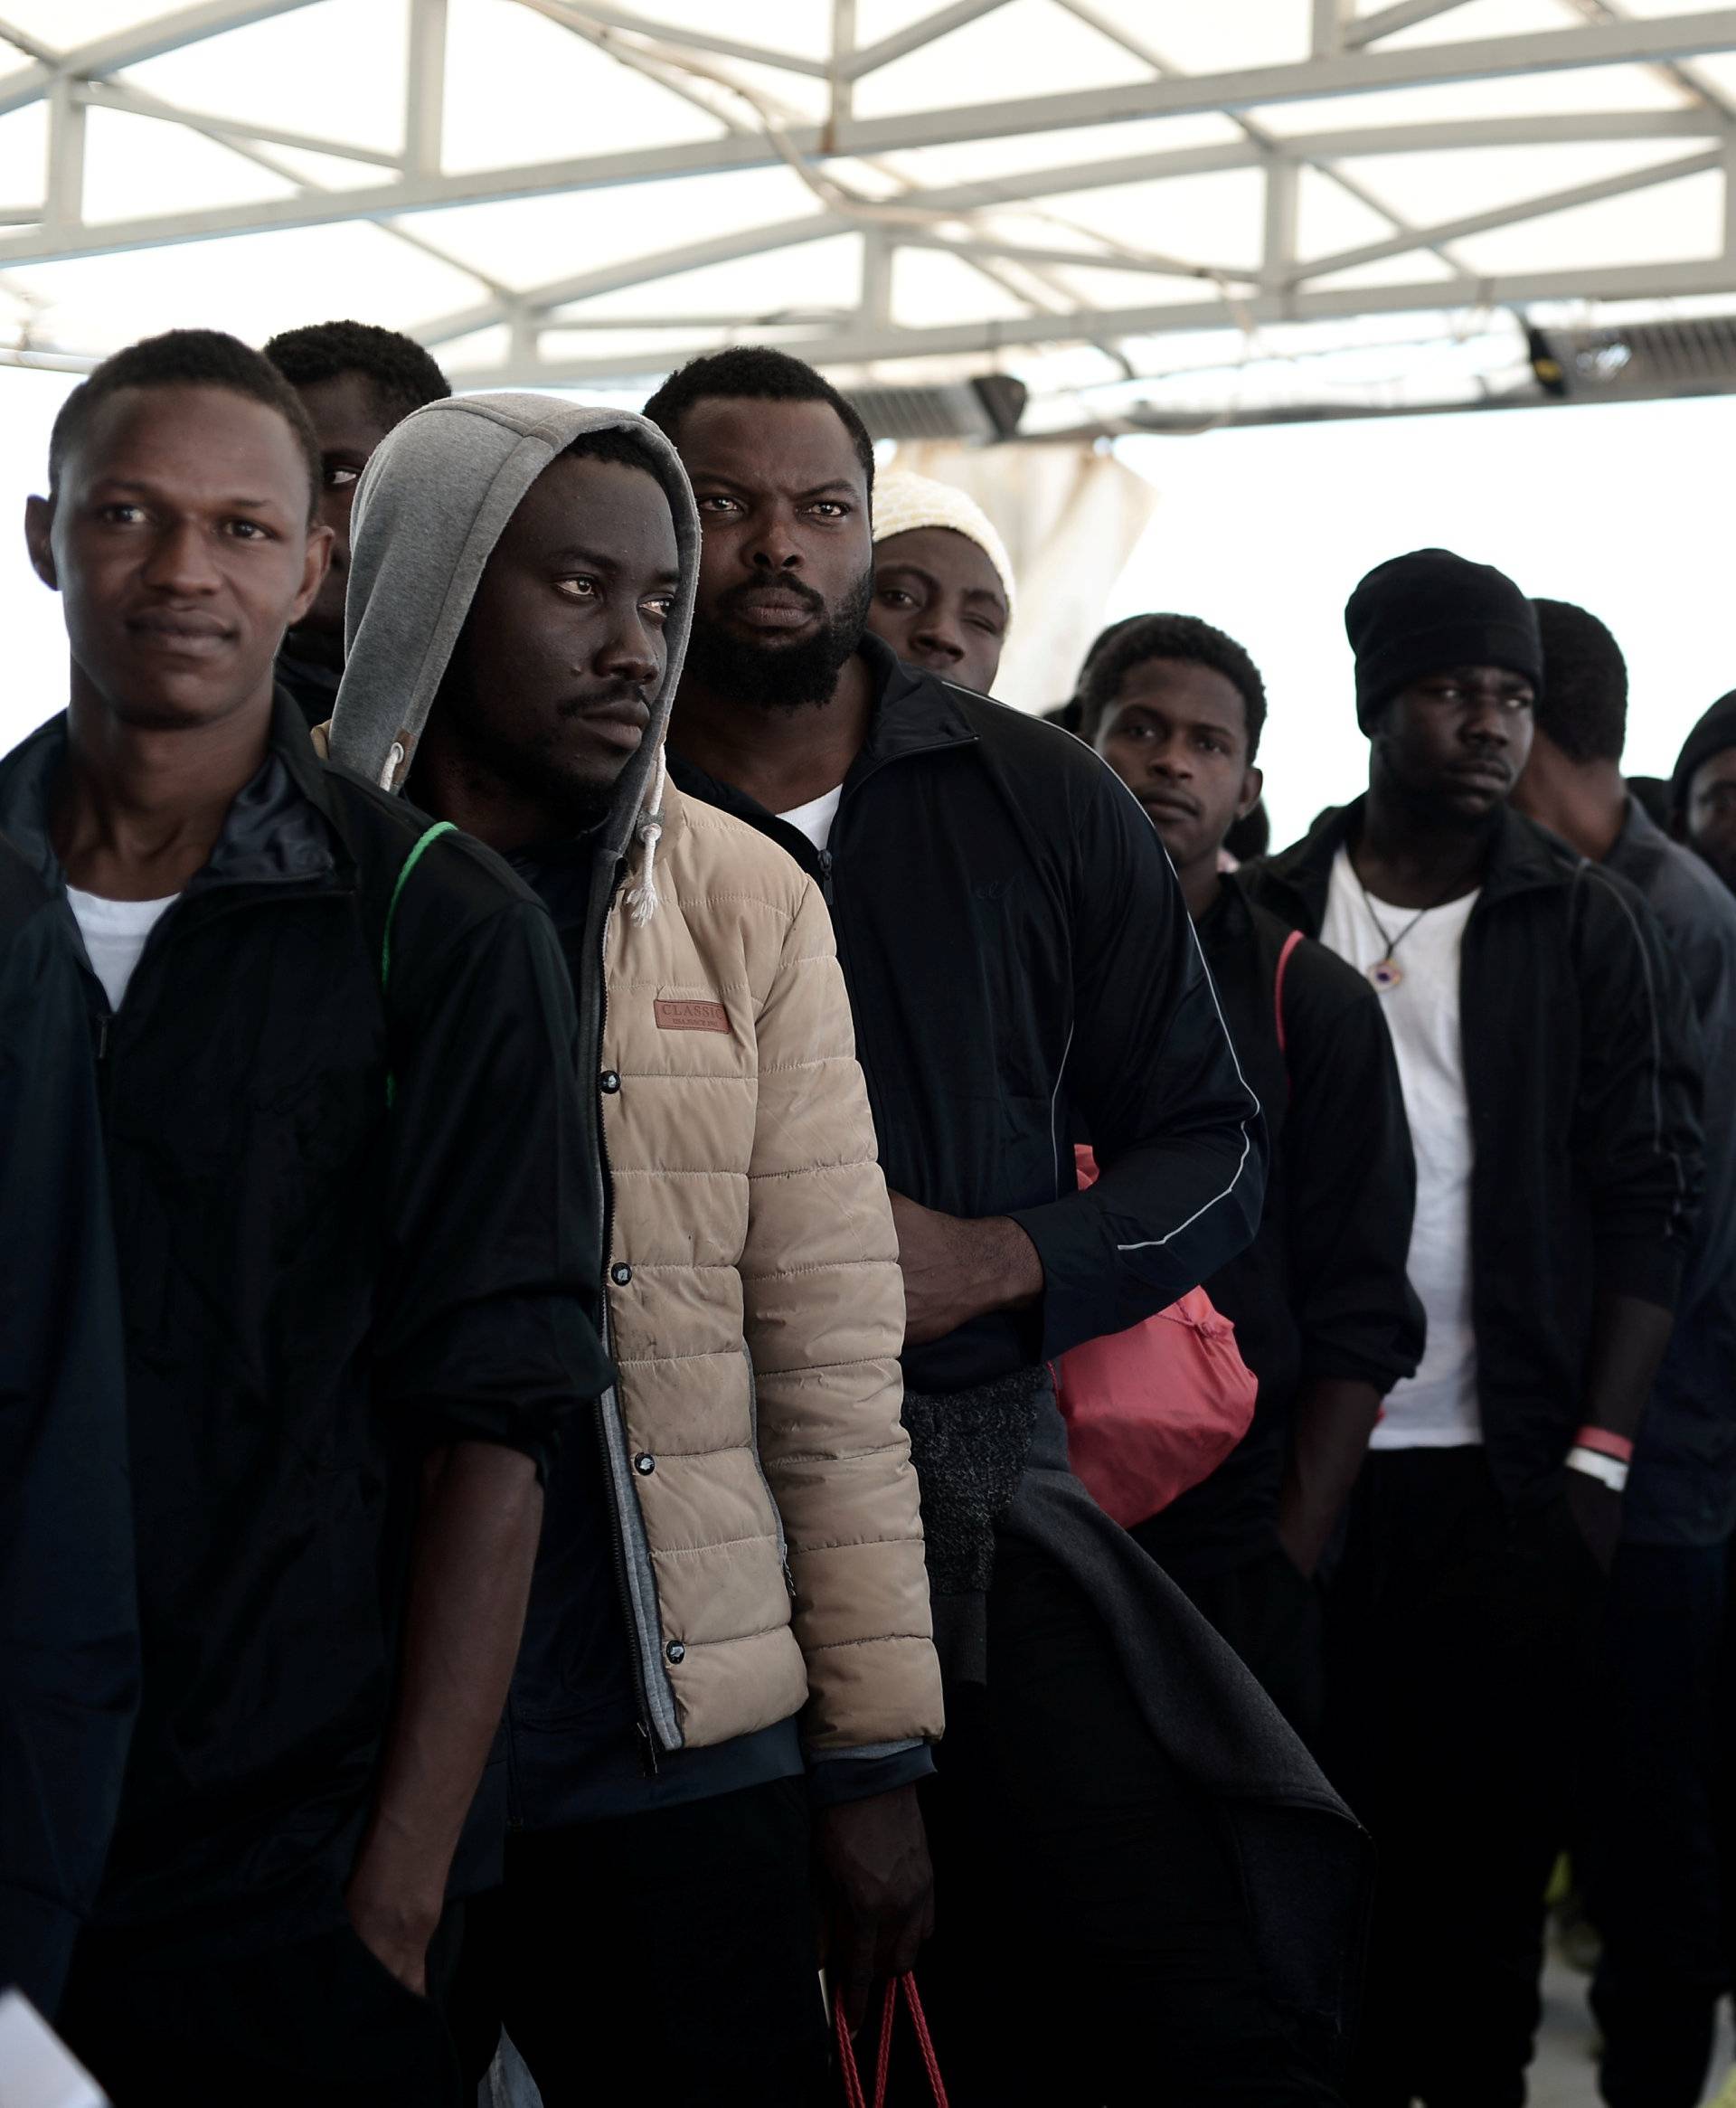 Migrants wait to disembark from the Aquarius rescue ship after arriving to port in Valencia